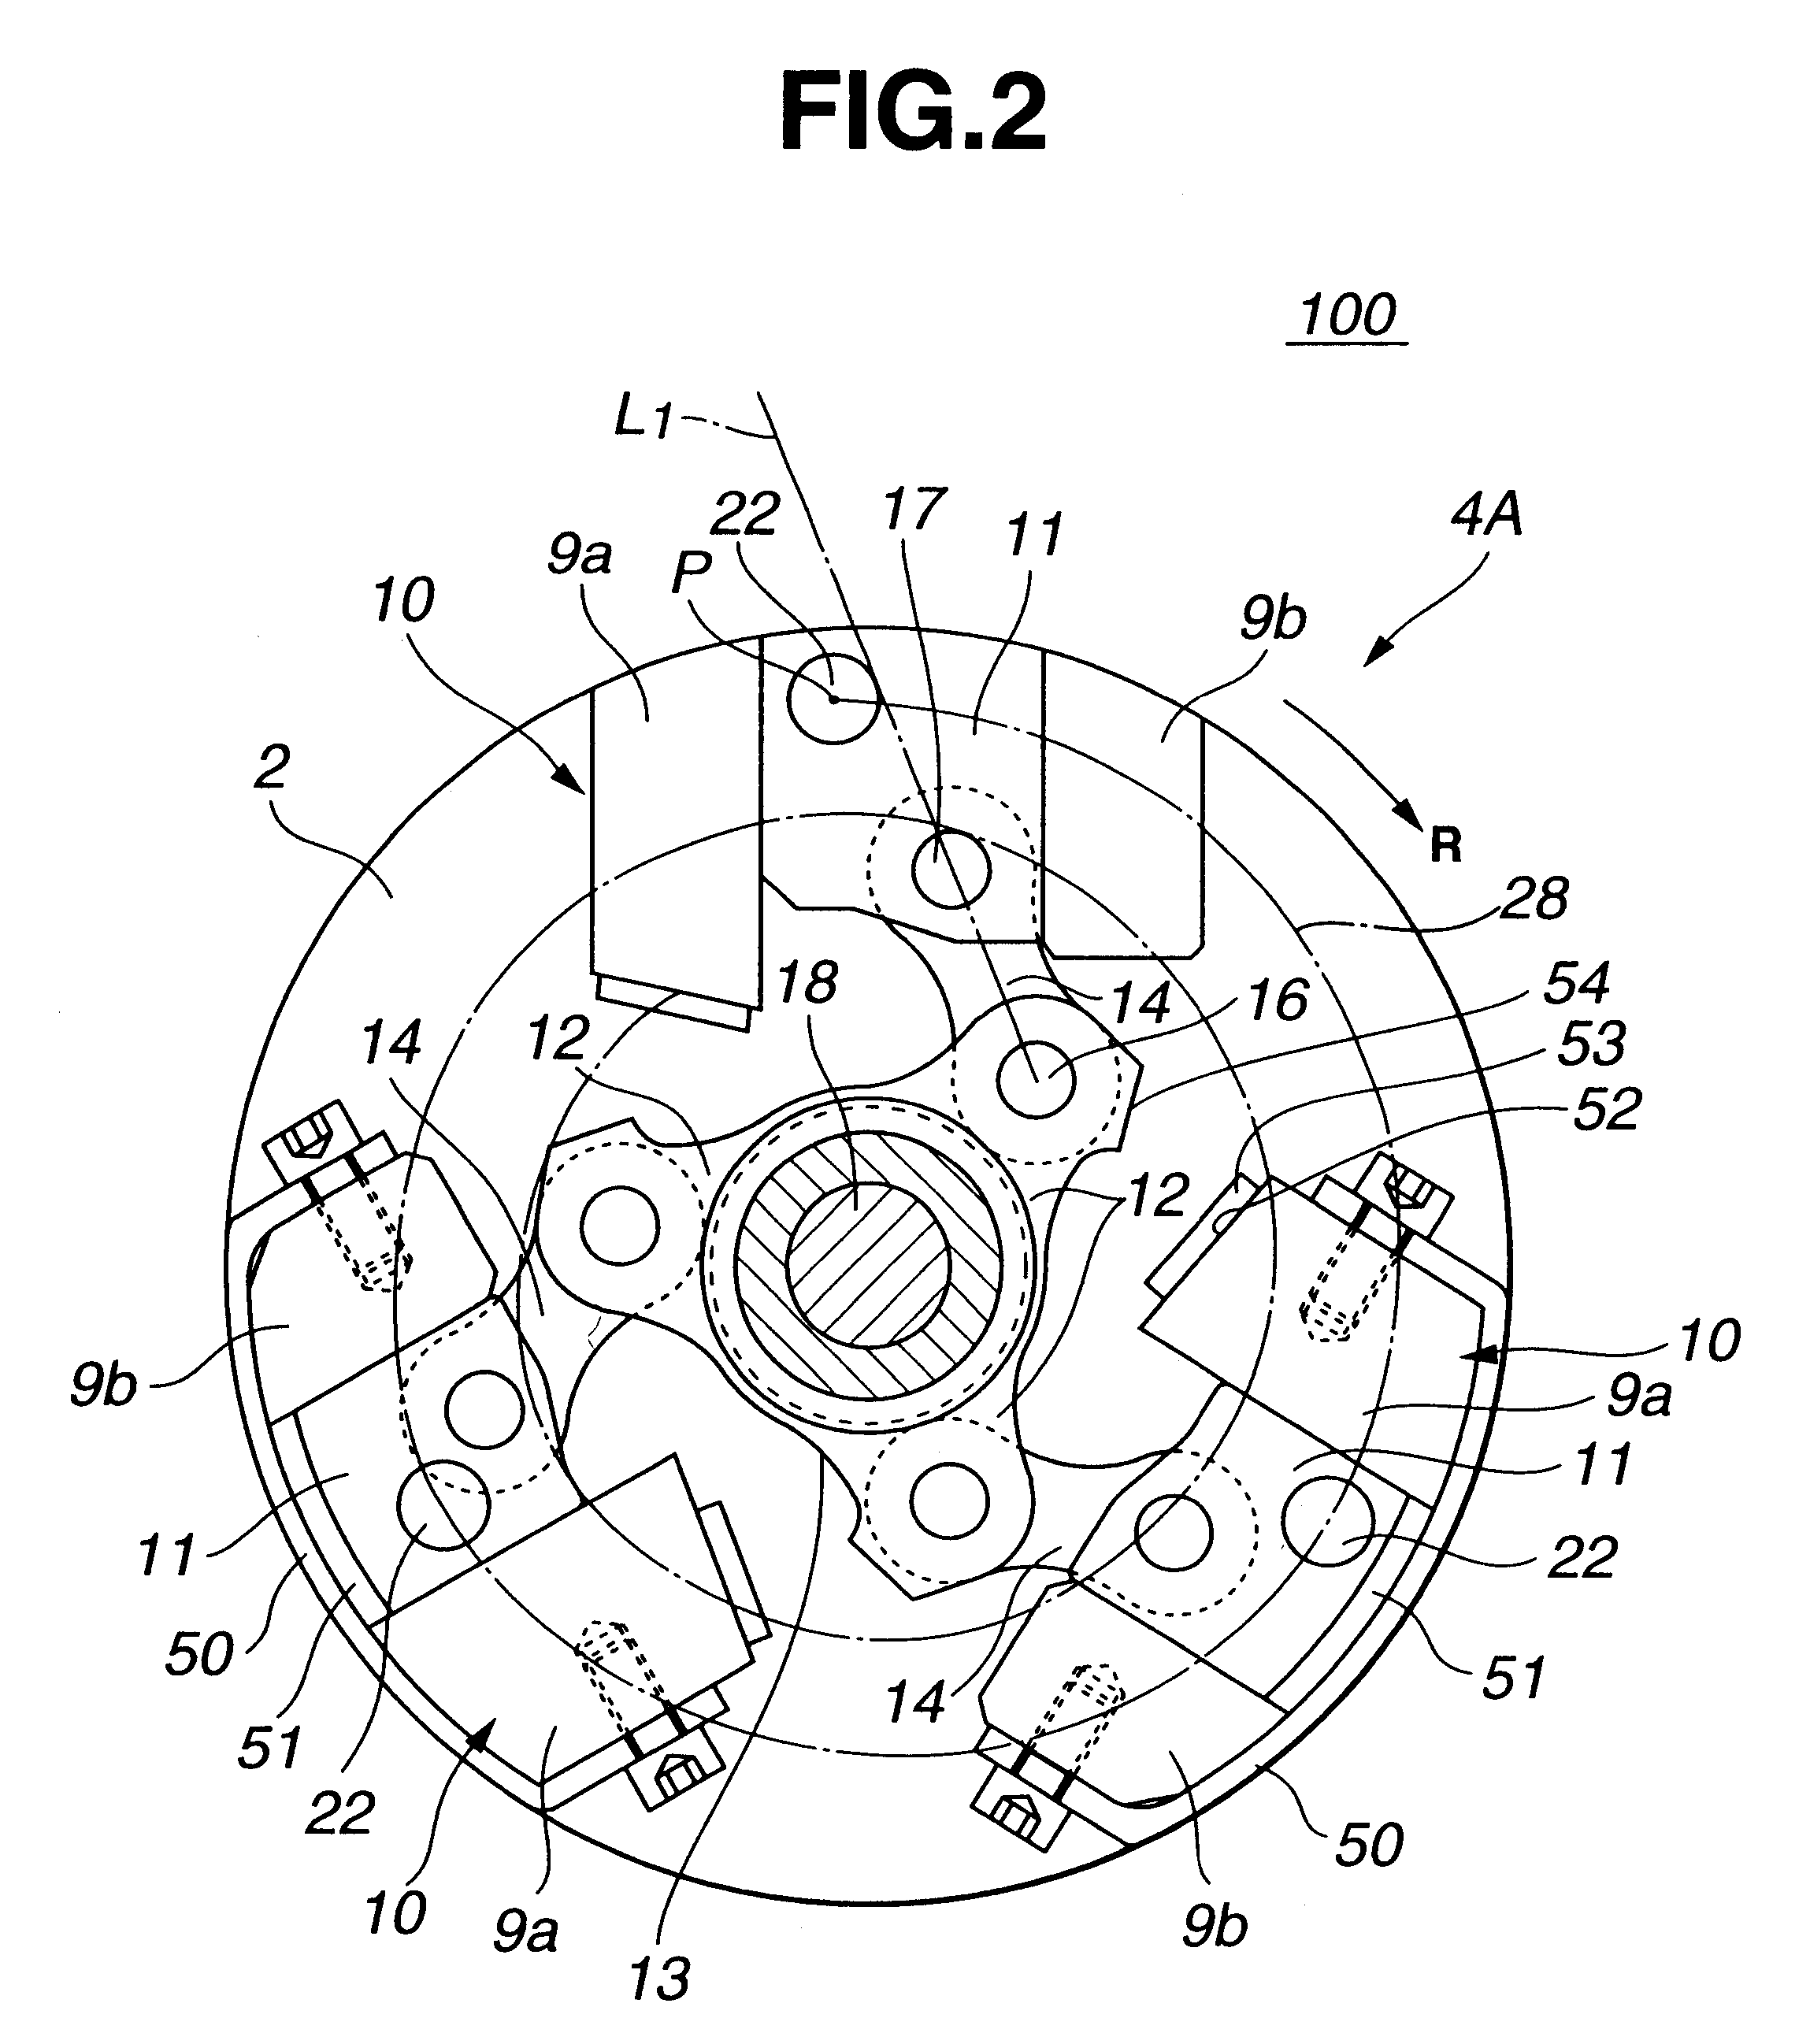 Valve timing control device of internal combustion engine